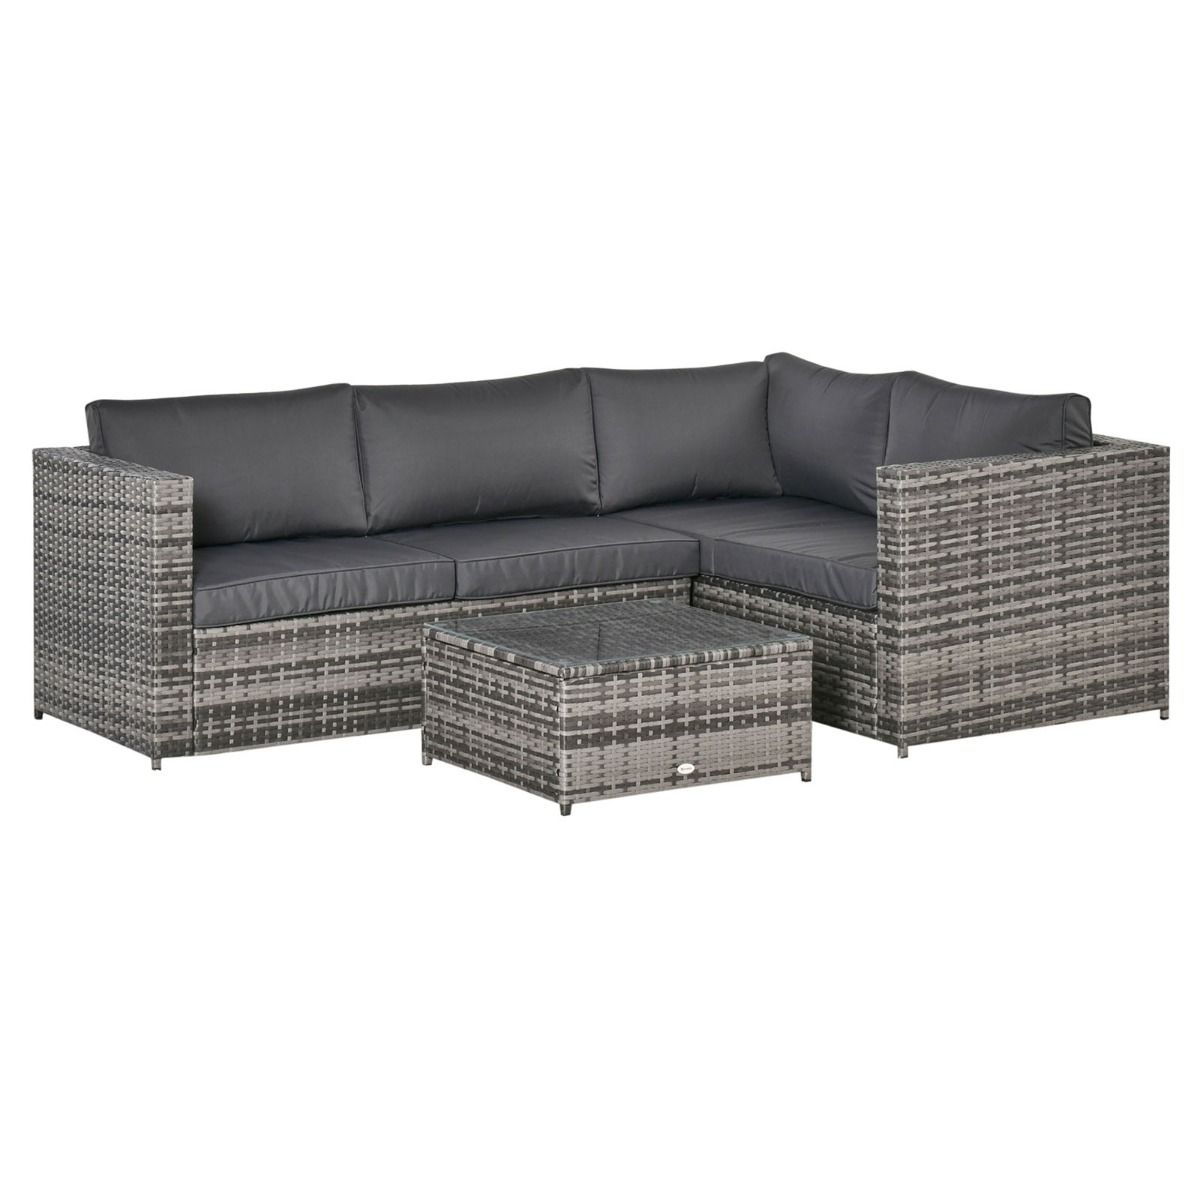 Outsunny Rattan Corner Sofa Set With Coffee Table, Grey - 4 Seater